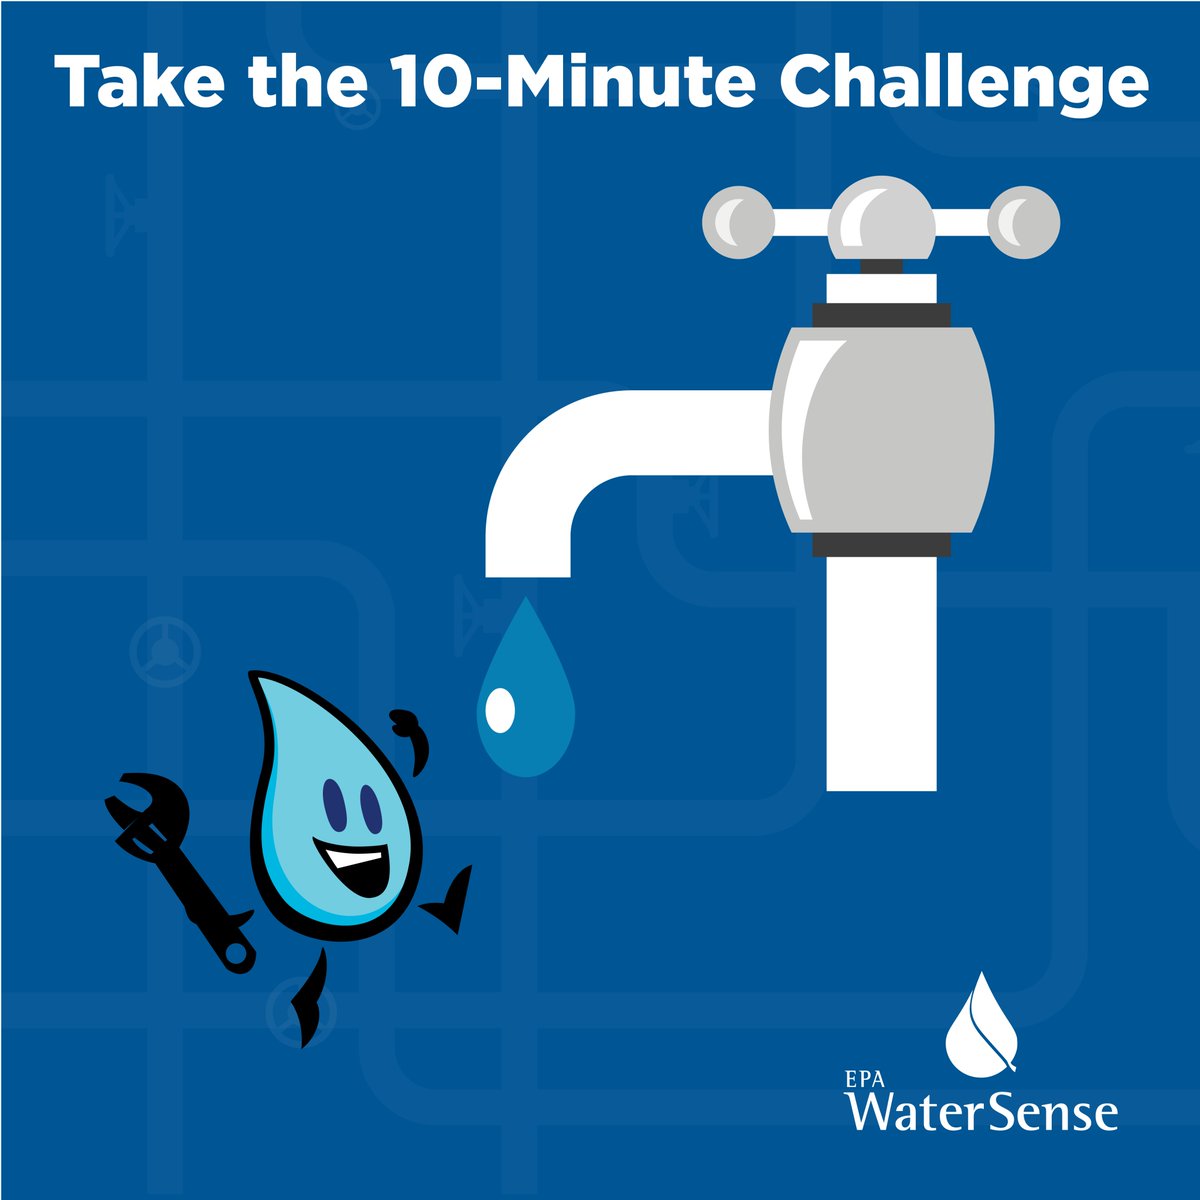 #DYK you can stop leaks in their tracks and save water in ten minutes? We will post easy to check areas of your home to track down leaks! Save water and stop leaks in their tracks. A win-win 😀 #FixALeak epa.gov/sites/default/…